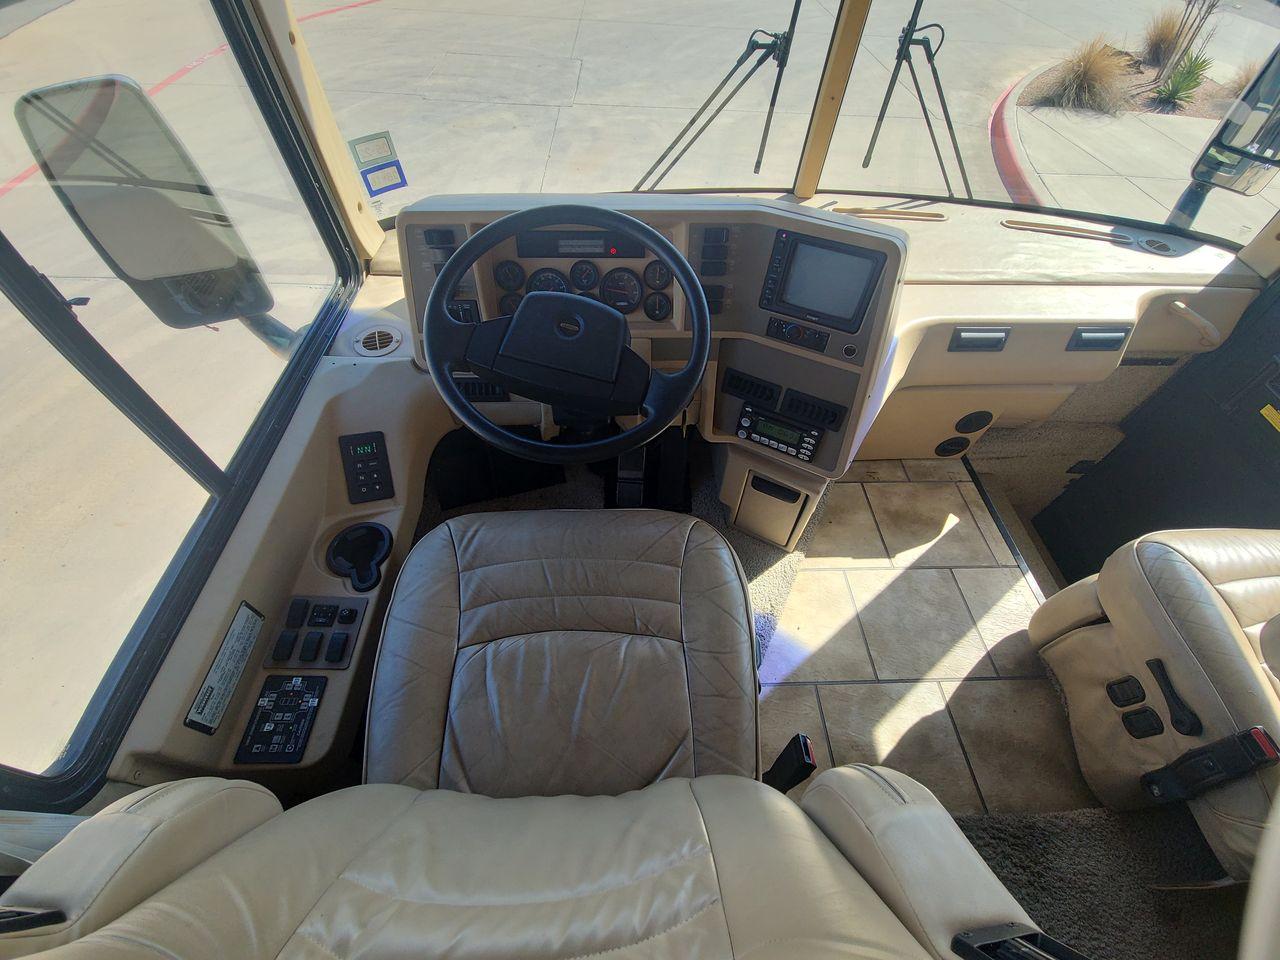 2007 TAN WINNEBAGO JOURNEY 36G (4UZACJDC67C) , Length: 36.5 ft | Gross Weight: 27,910 lbs | Slides: 2 transmission, located at 4319 N Main St, Cleburne, TX, 76033, (817) 678-5133, 32.385960, -97.391212 - This 2007 Winnebago Journey is 36.5 feet long, almost 12 feet tall, and has two slides near the middle of the motorhome. The outside of this vehicle is a base color of light brown with darker brown and great decals striping the exterior. This is a dual axel with a GVWR of 27,910 lbs. The exterior - Photo #22